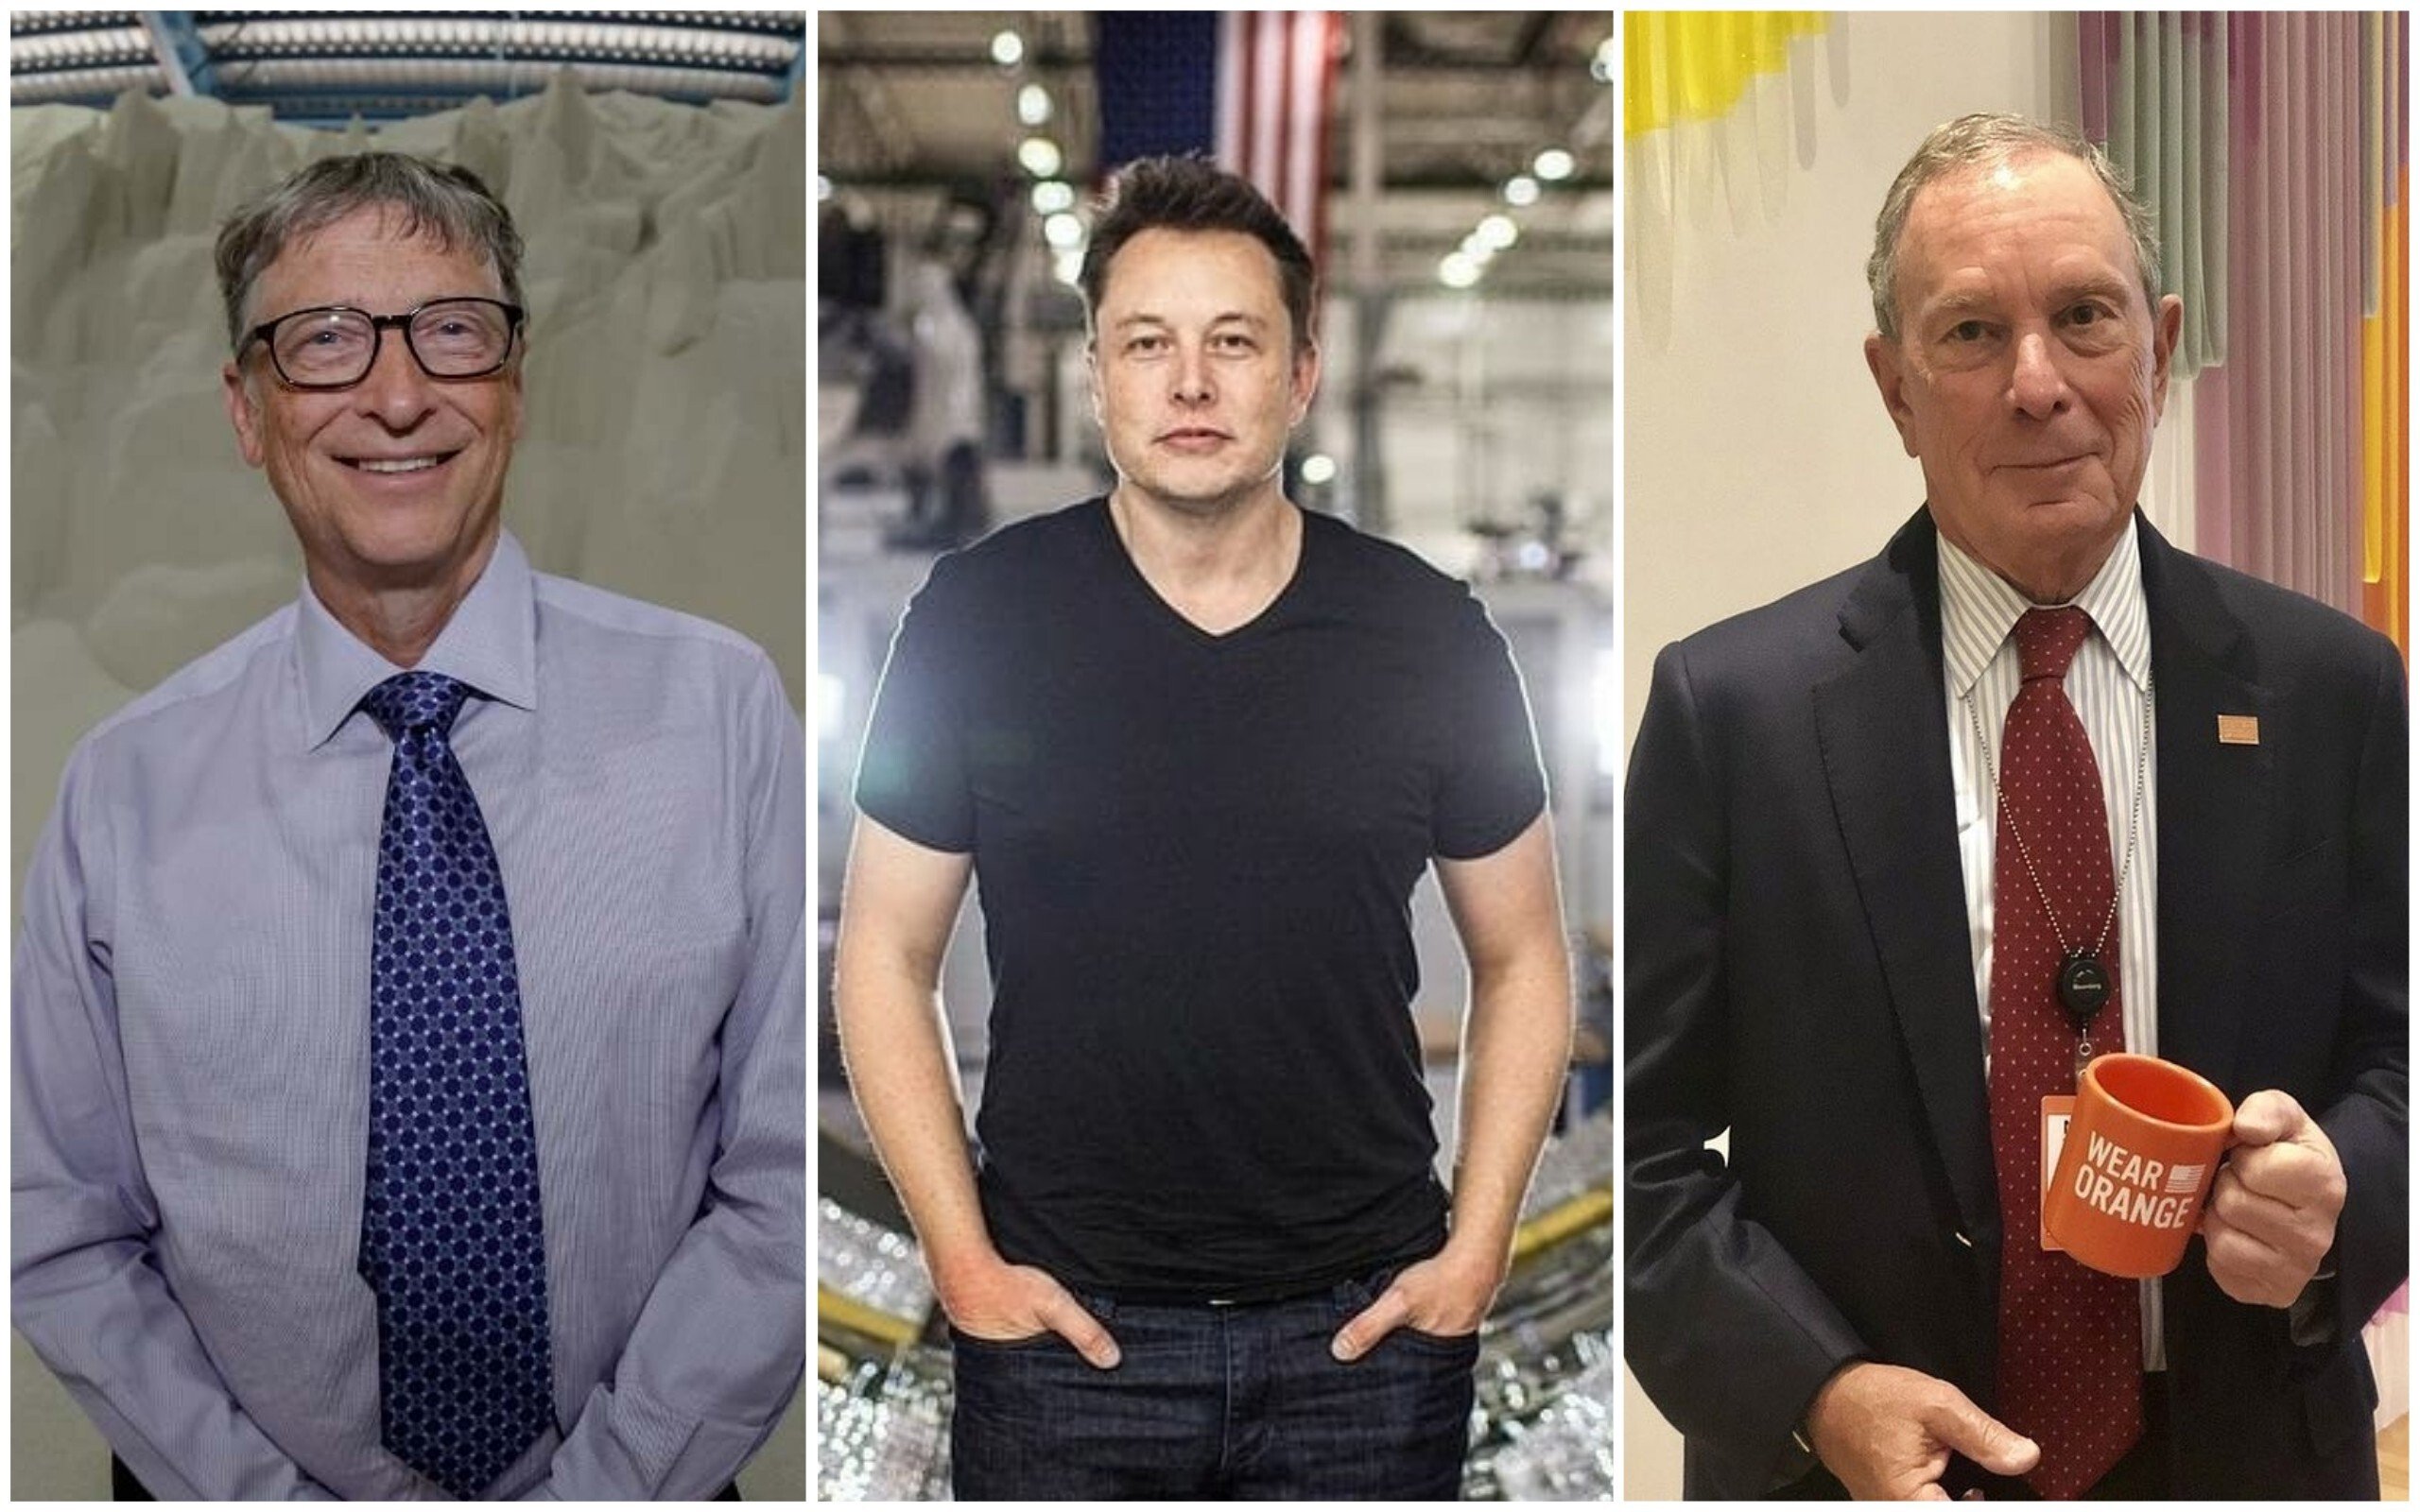 Bill Gates, Elon Musk and Michael Bloomberg have all seen their wealth increase this year despite the coronavirus pandemic. Photos: Instagram